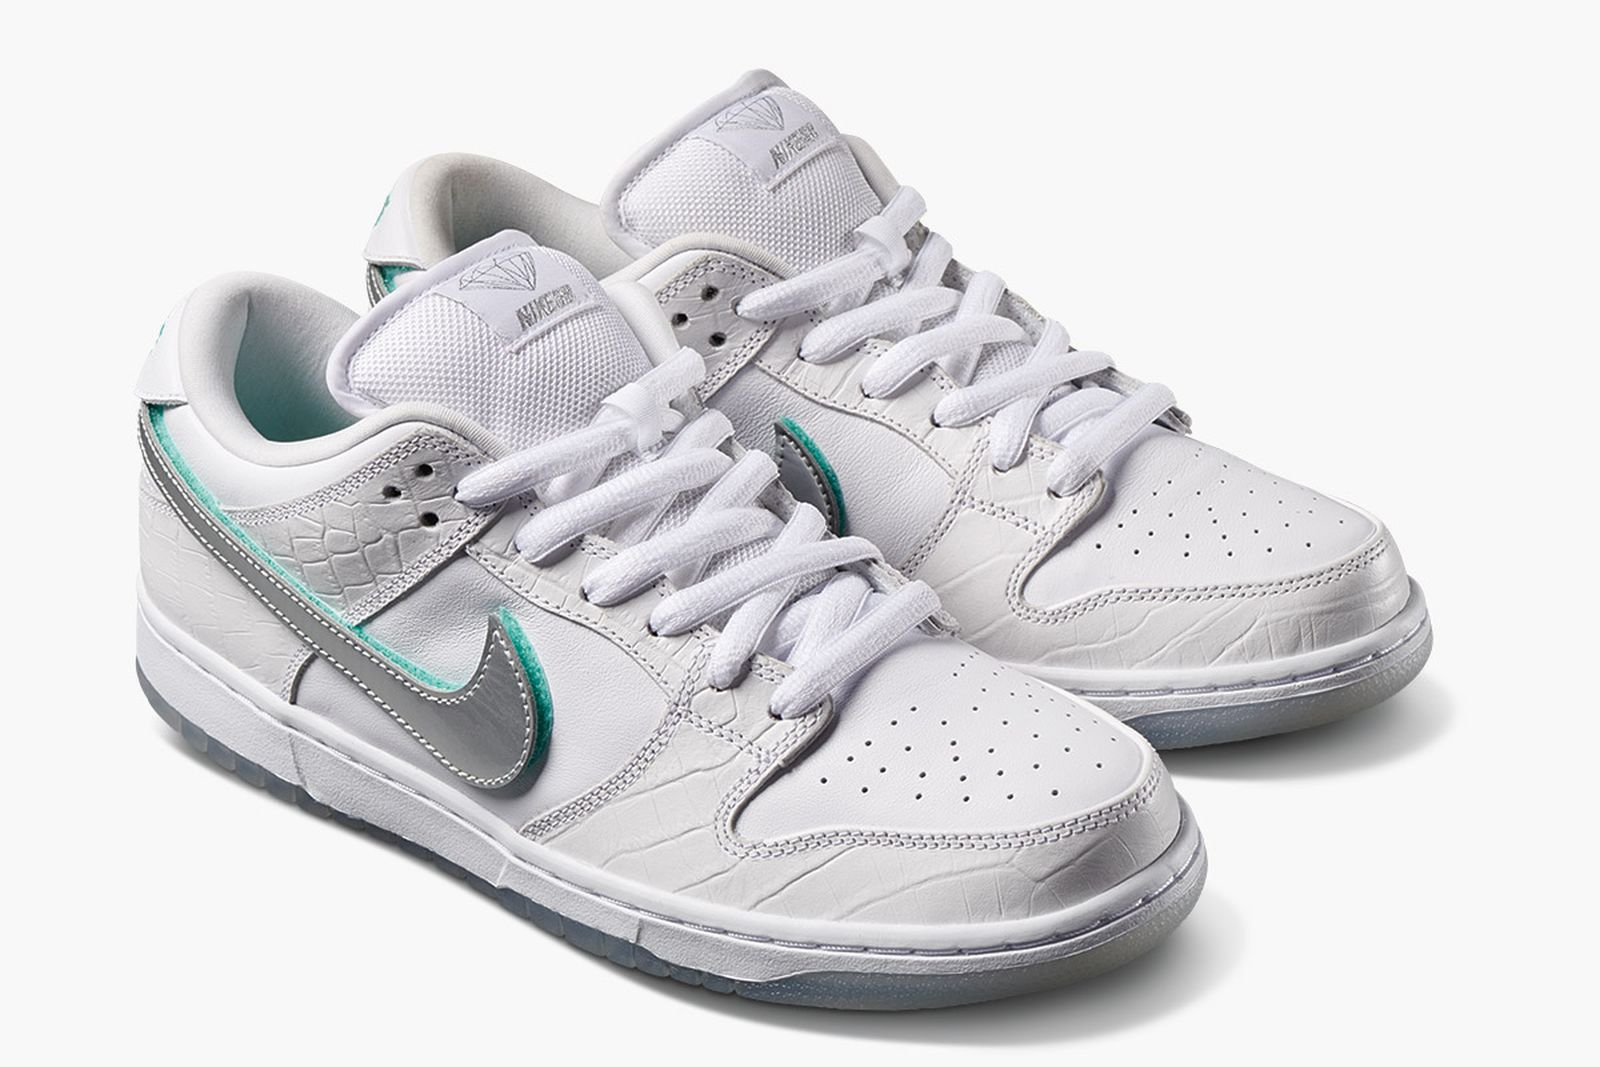 Cop the Diamond Supply x Nike SB Dunk Low at StockX